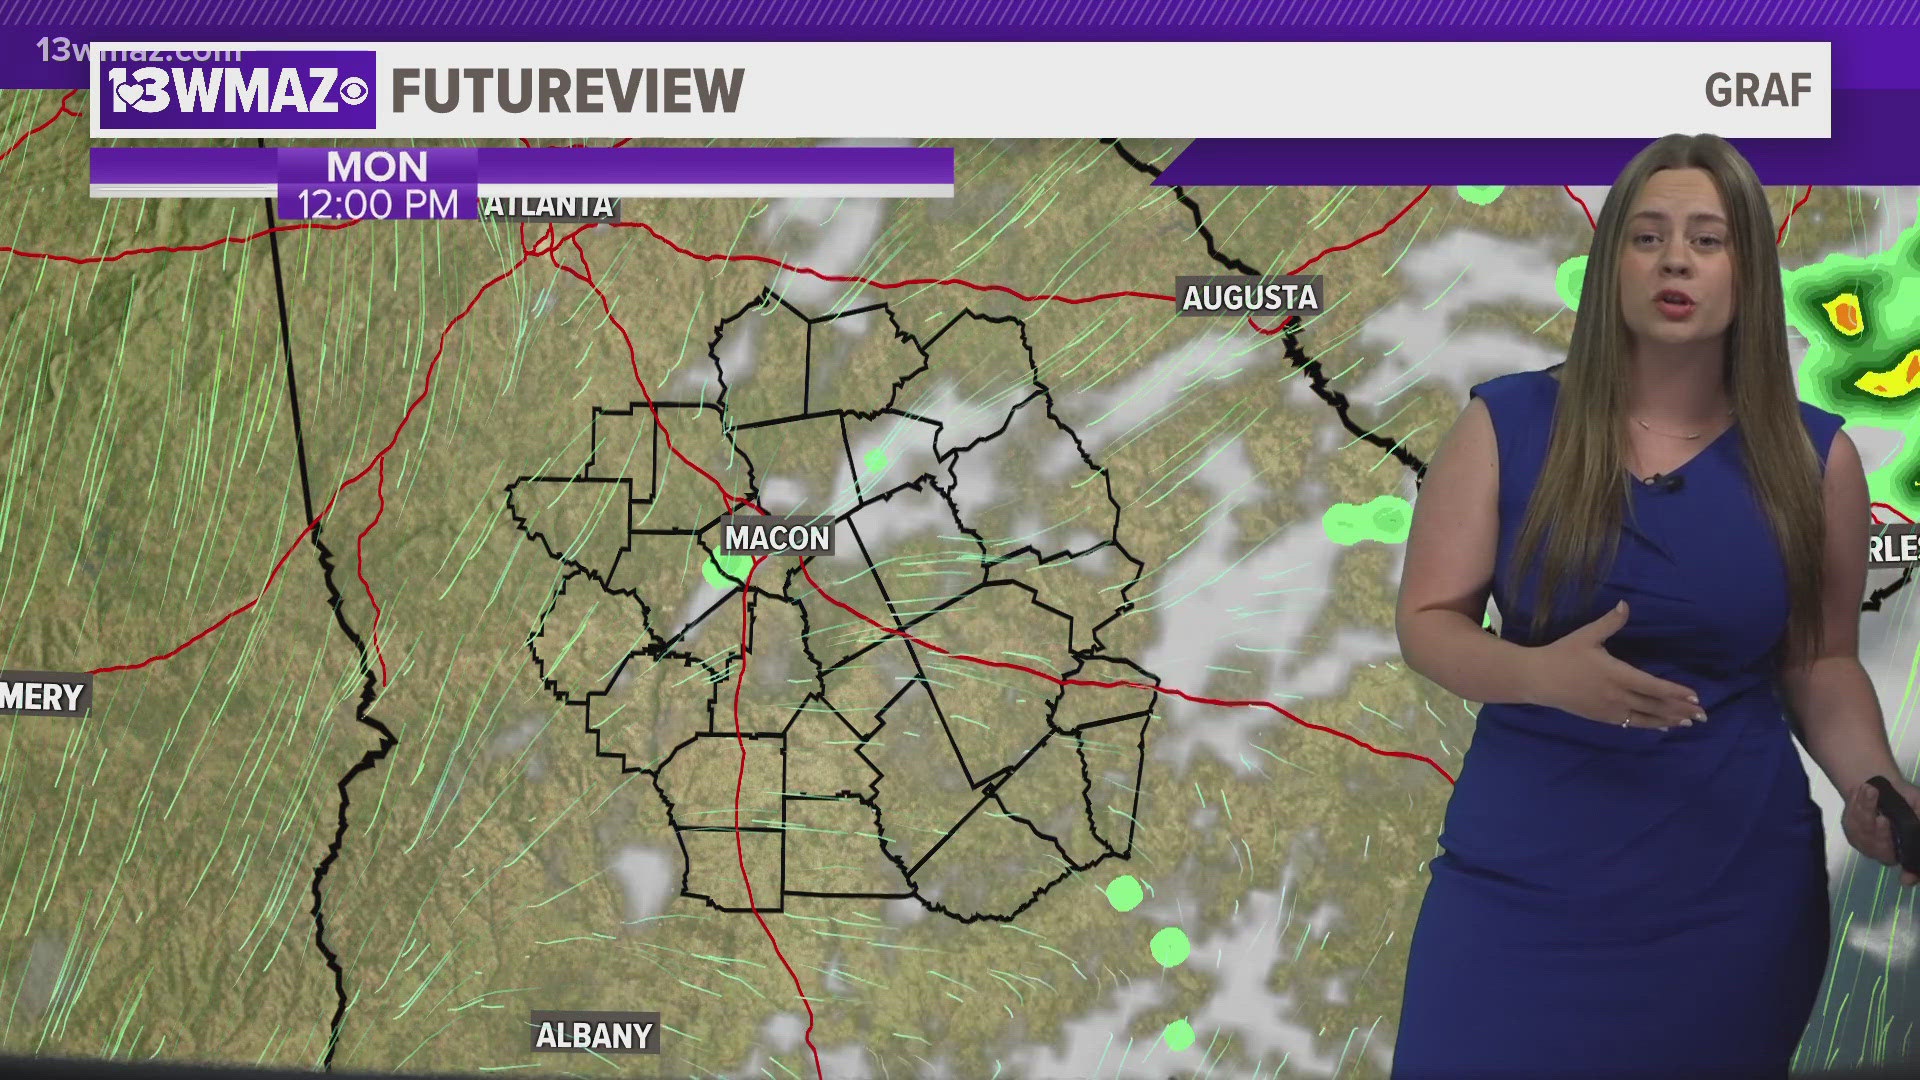 Meteorologist Ansley Parker provides an update for the weather in the upcoming week.